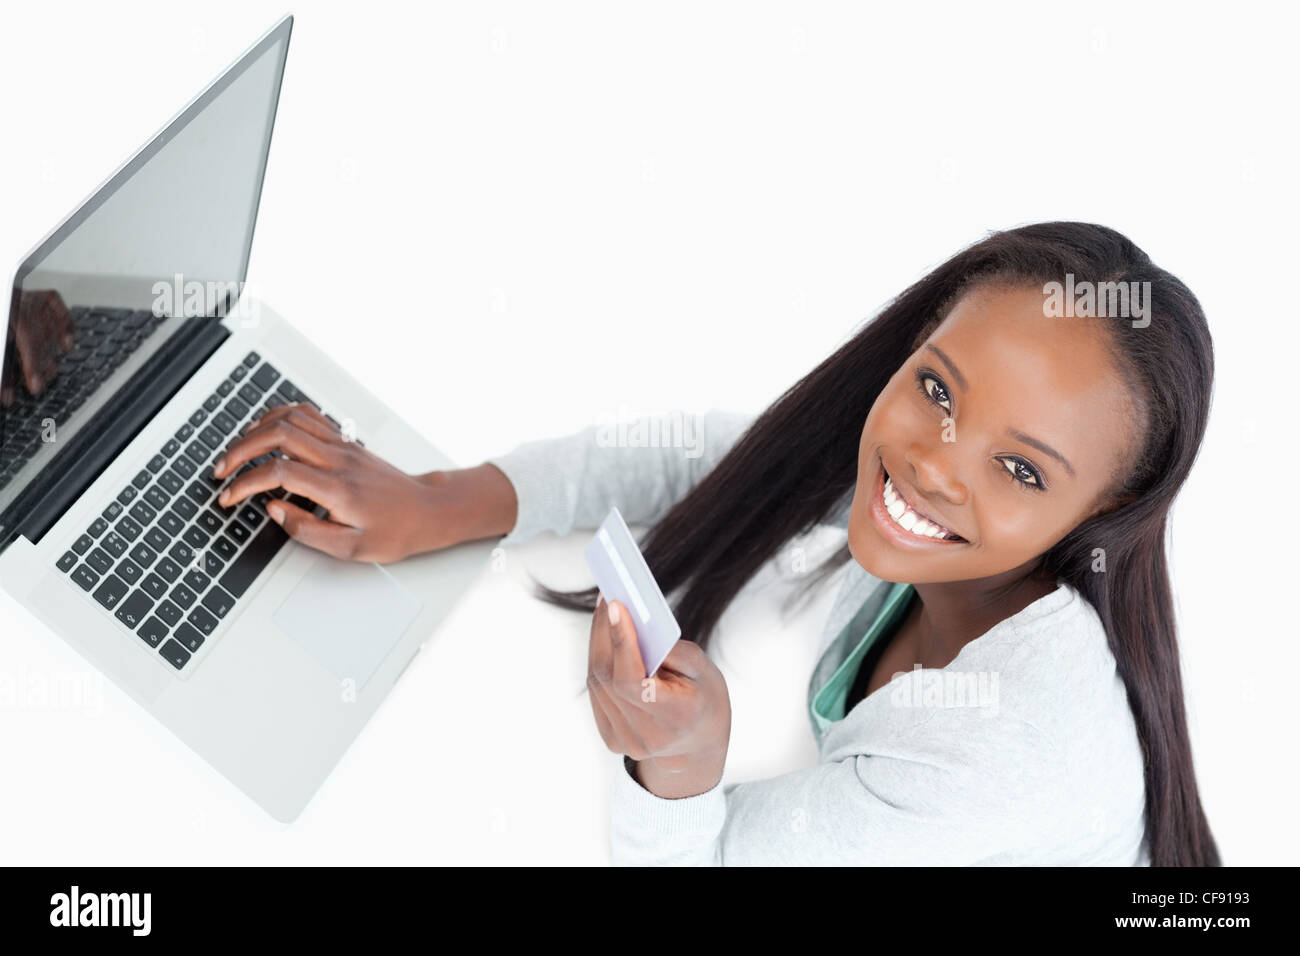 Smiling woman booking flight online Stock Photo